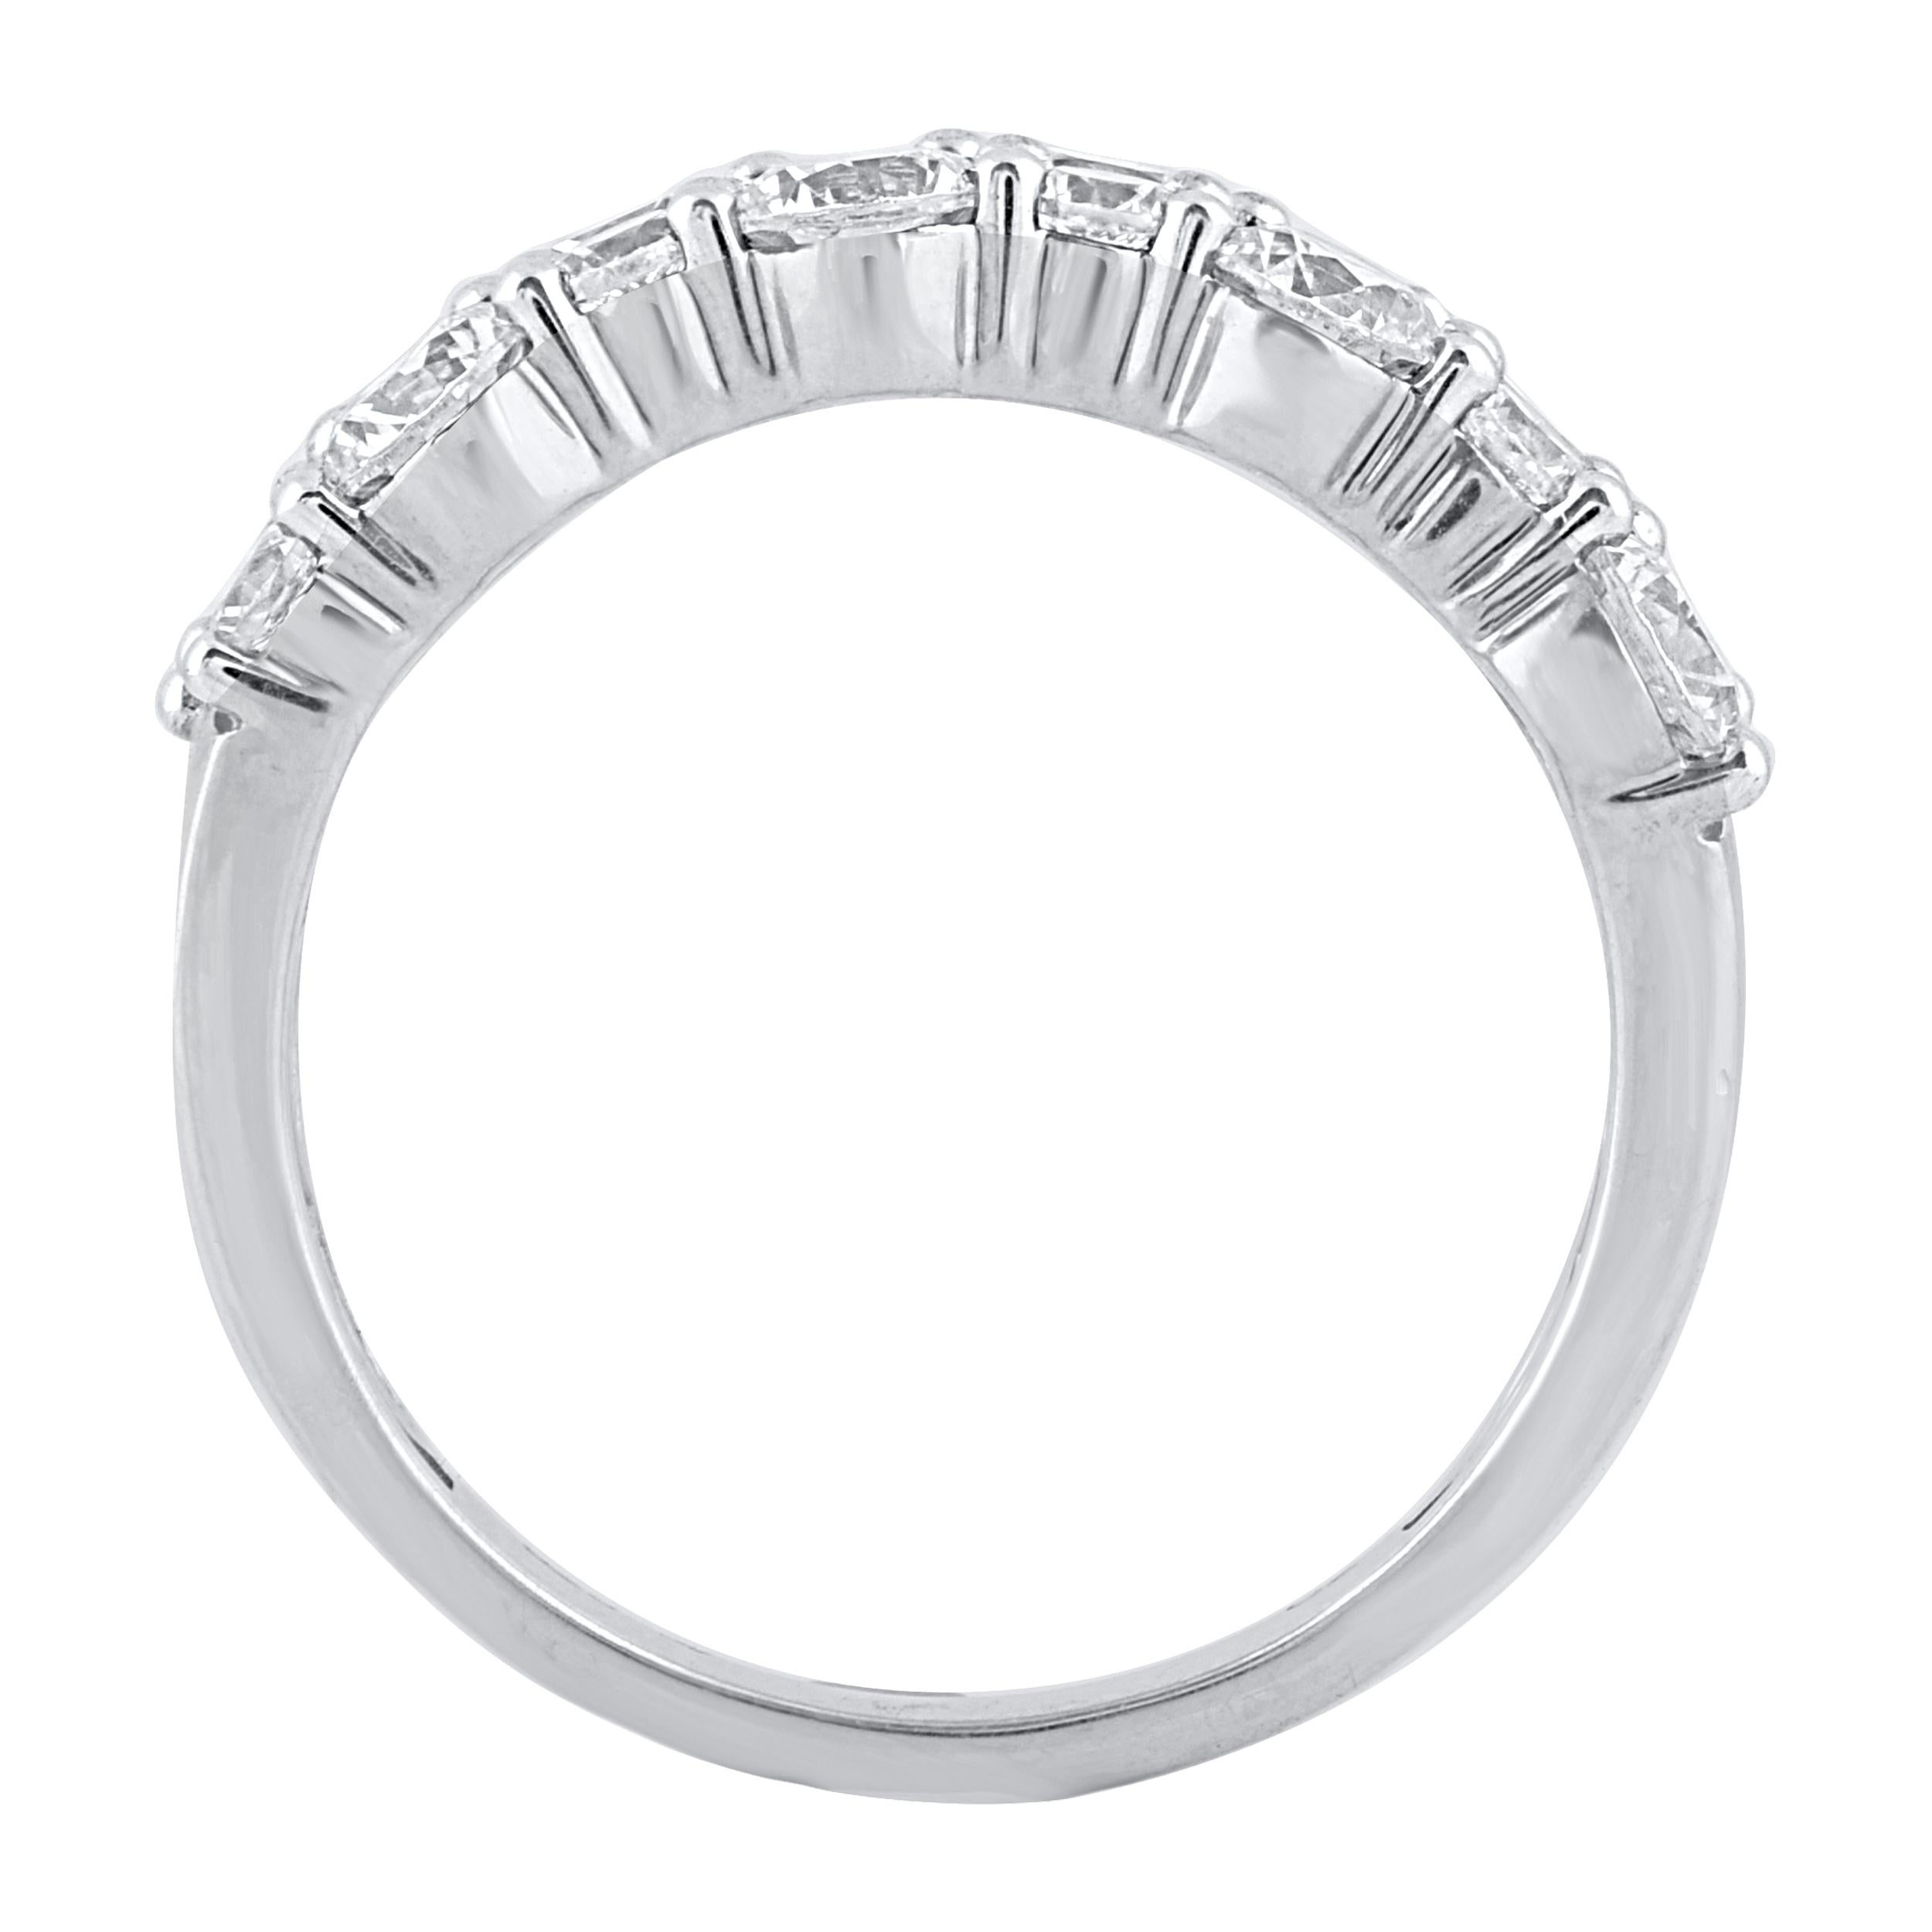 This beautiful engagement band ring features shimmering brilliant cut round diamonds in prong setting. Crafted in 14 karat white gold. The ring is studded with a total of 16 brilliant cut natural round diamonds and the total diamond weight is 2.0